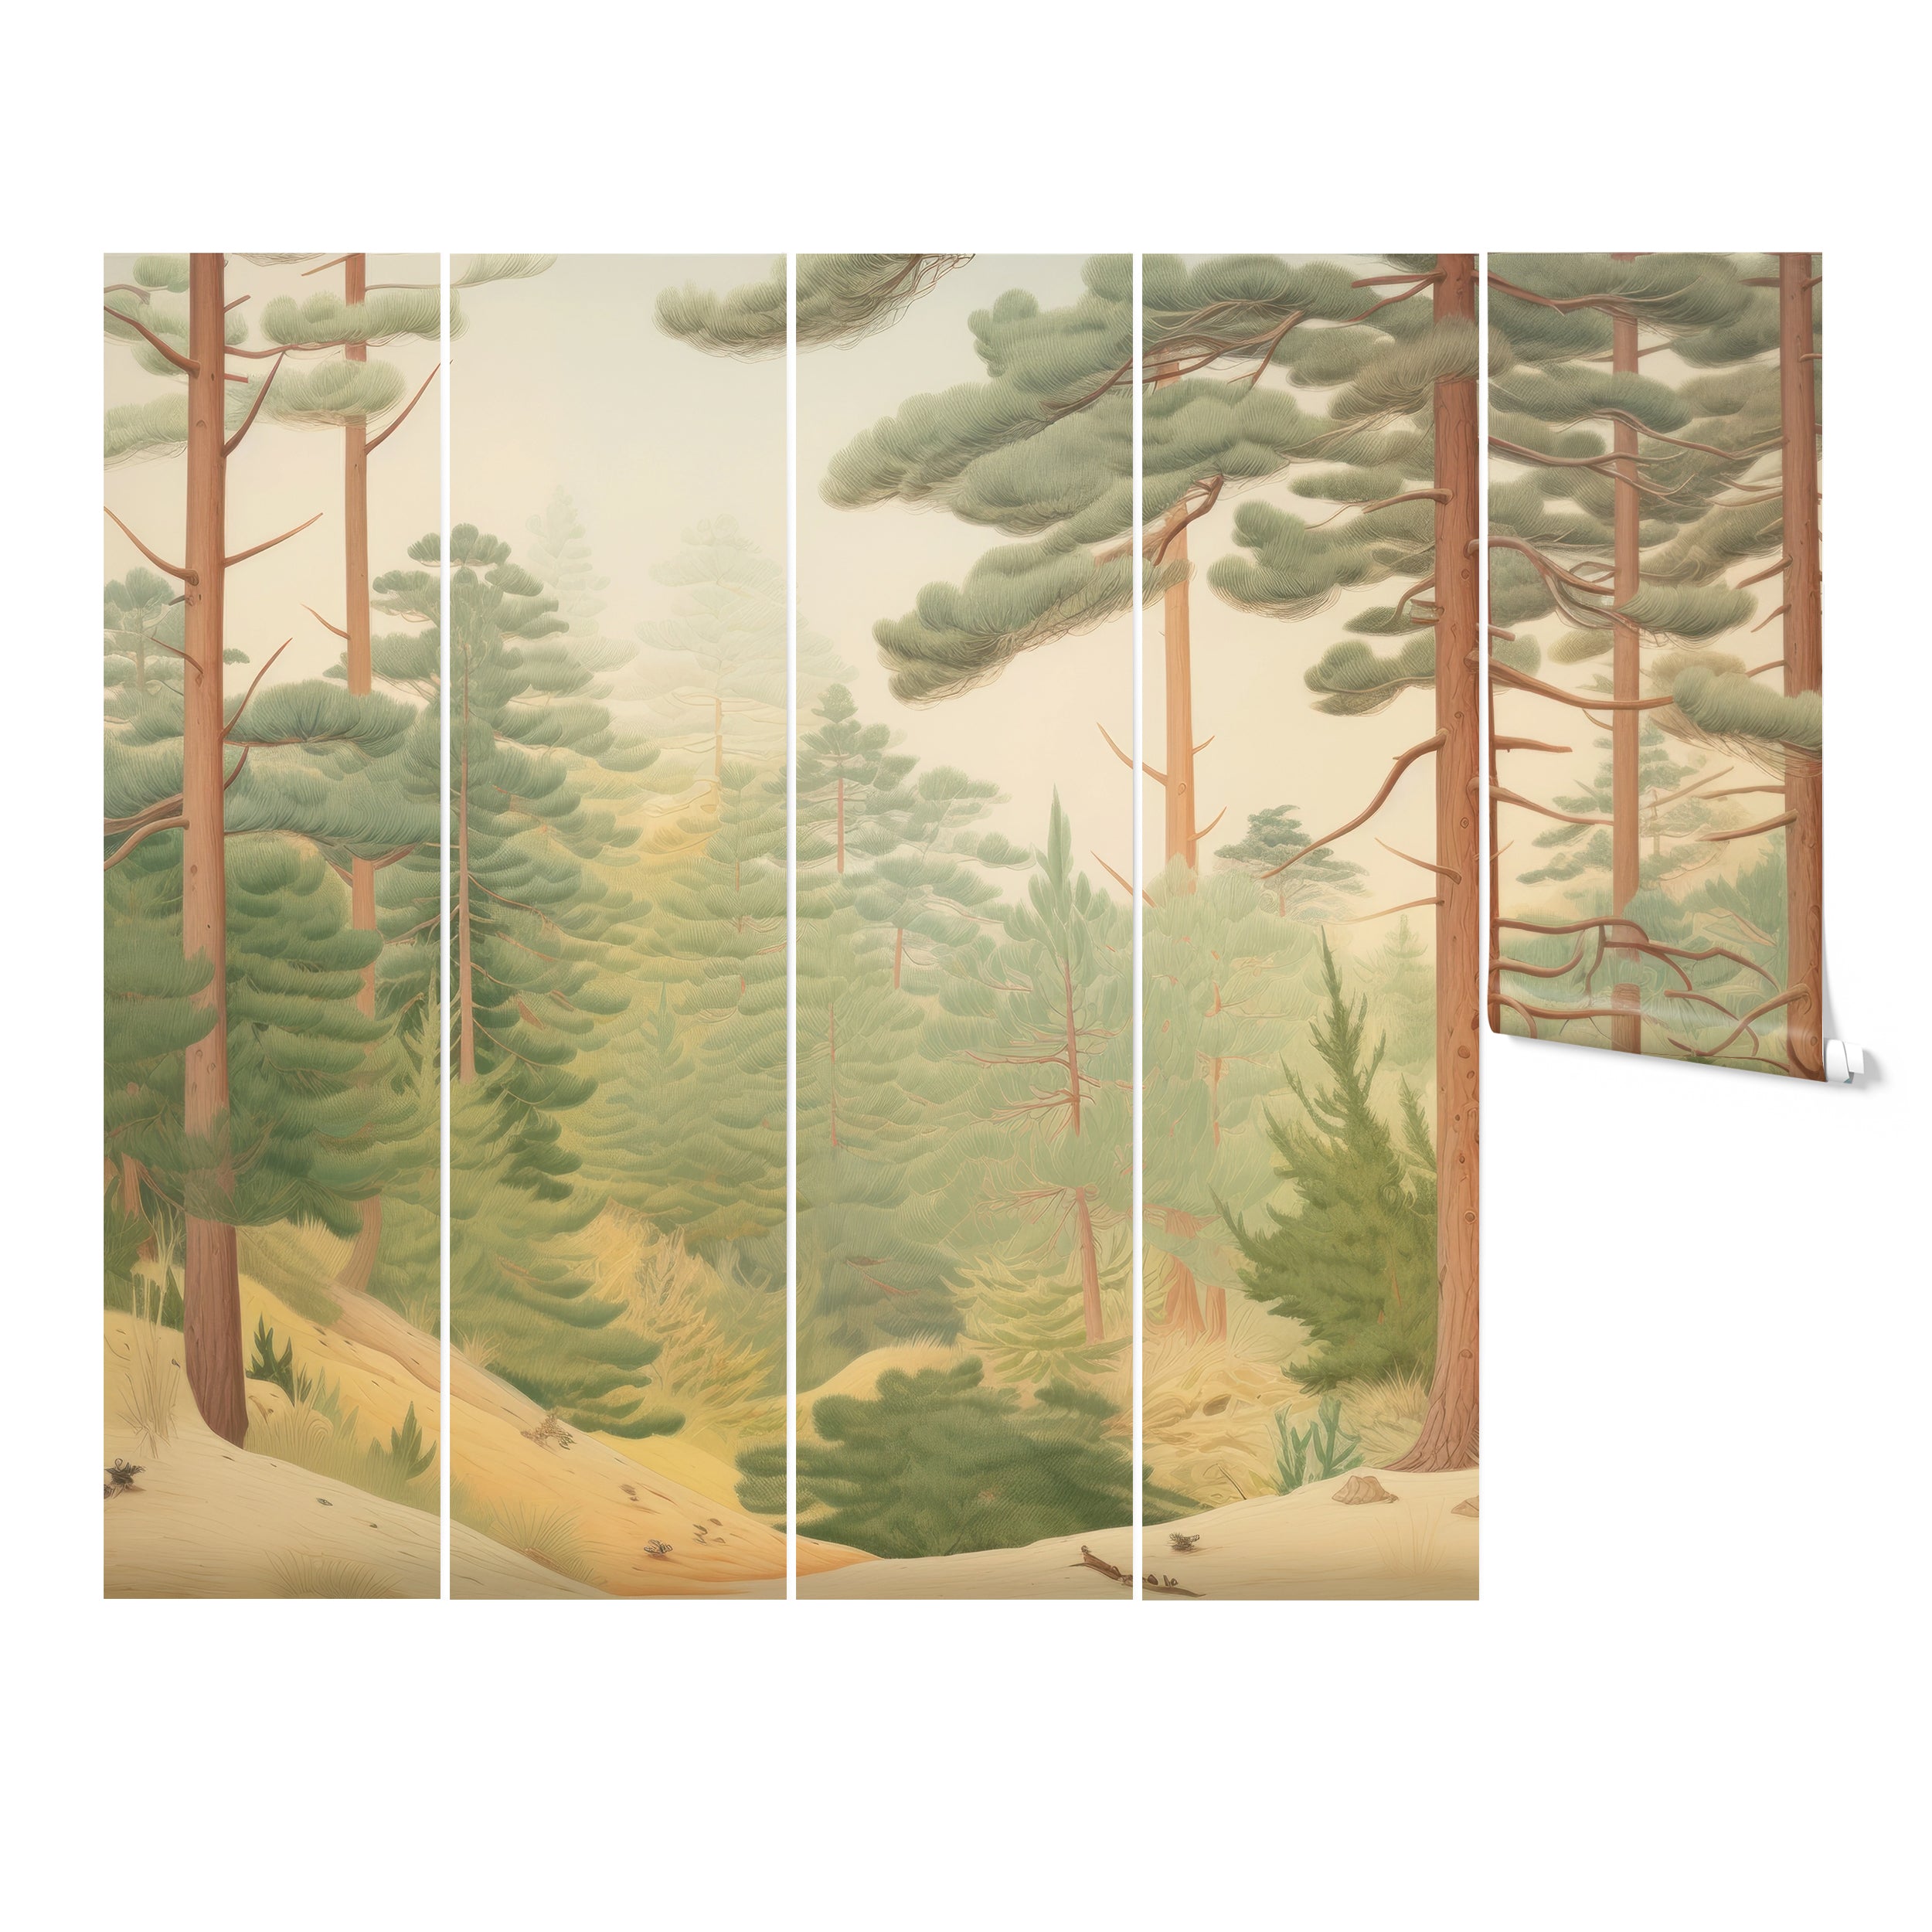 "Rolled wallpaper panels of the 'Gila Forest Mural' ready for installation, displaying an artistic rendition of a pine forest."